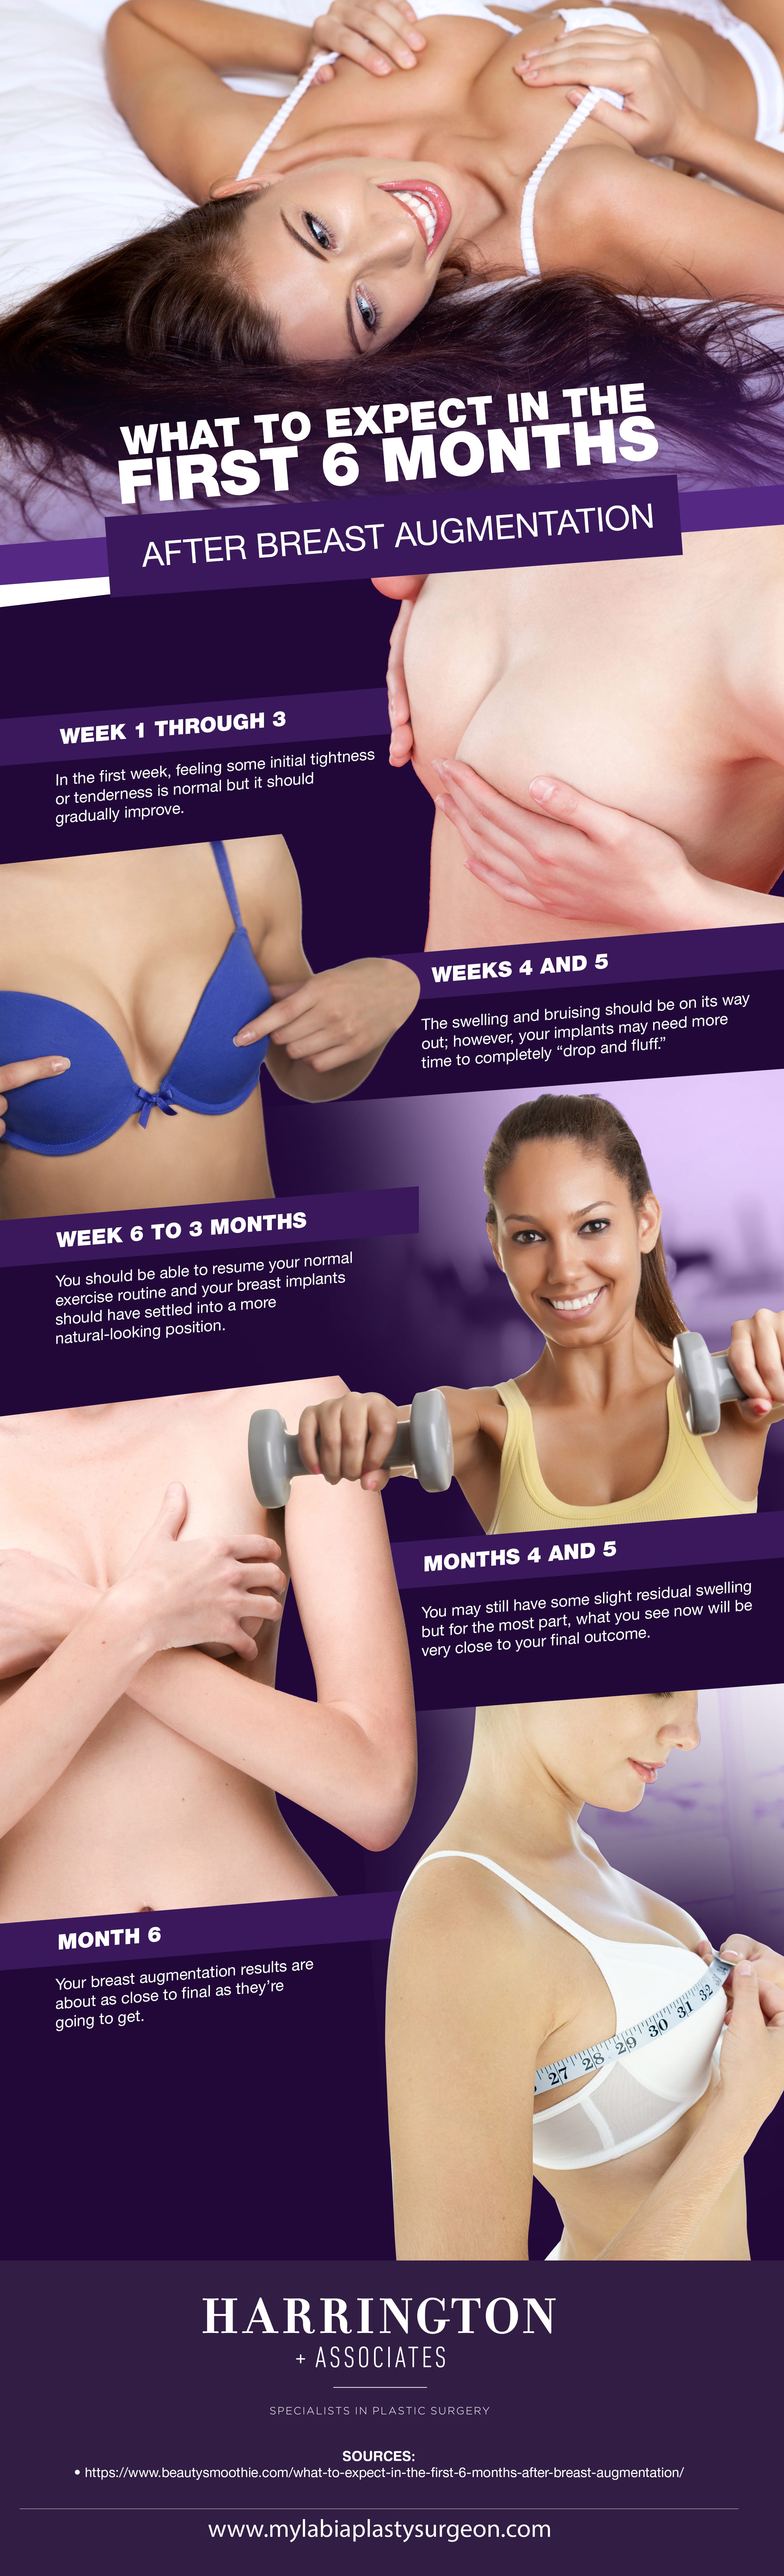 What to Expect in the First 6 Months After Breast Augmentation [Infographic]